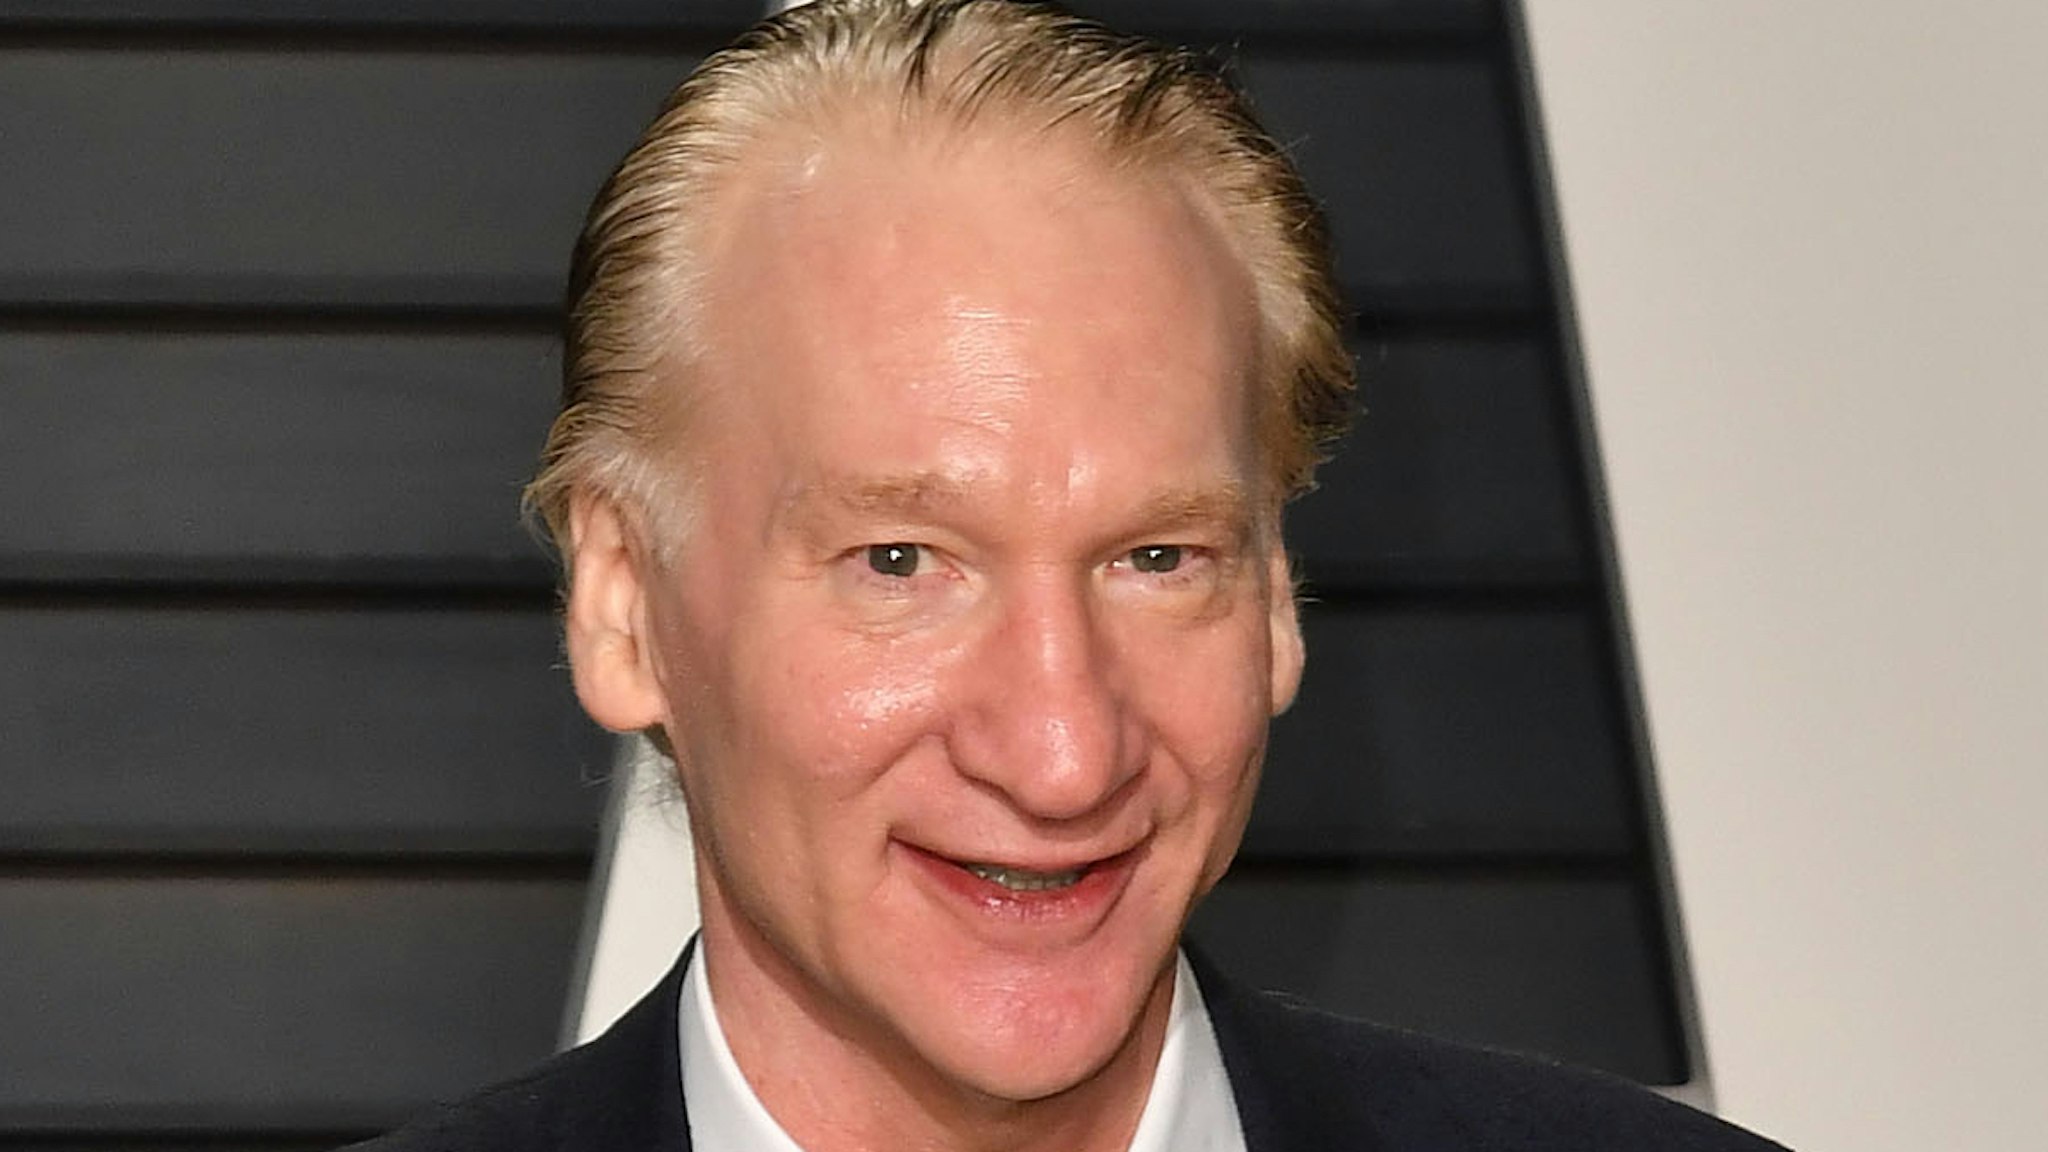 Bill Maher attends the 2017 Vanity Fair Oscar Party hosted by Graydon Carter at Wallis Annenberg Center for the Performing Arts on February 26, 2017 in Beverly Hills, California.